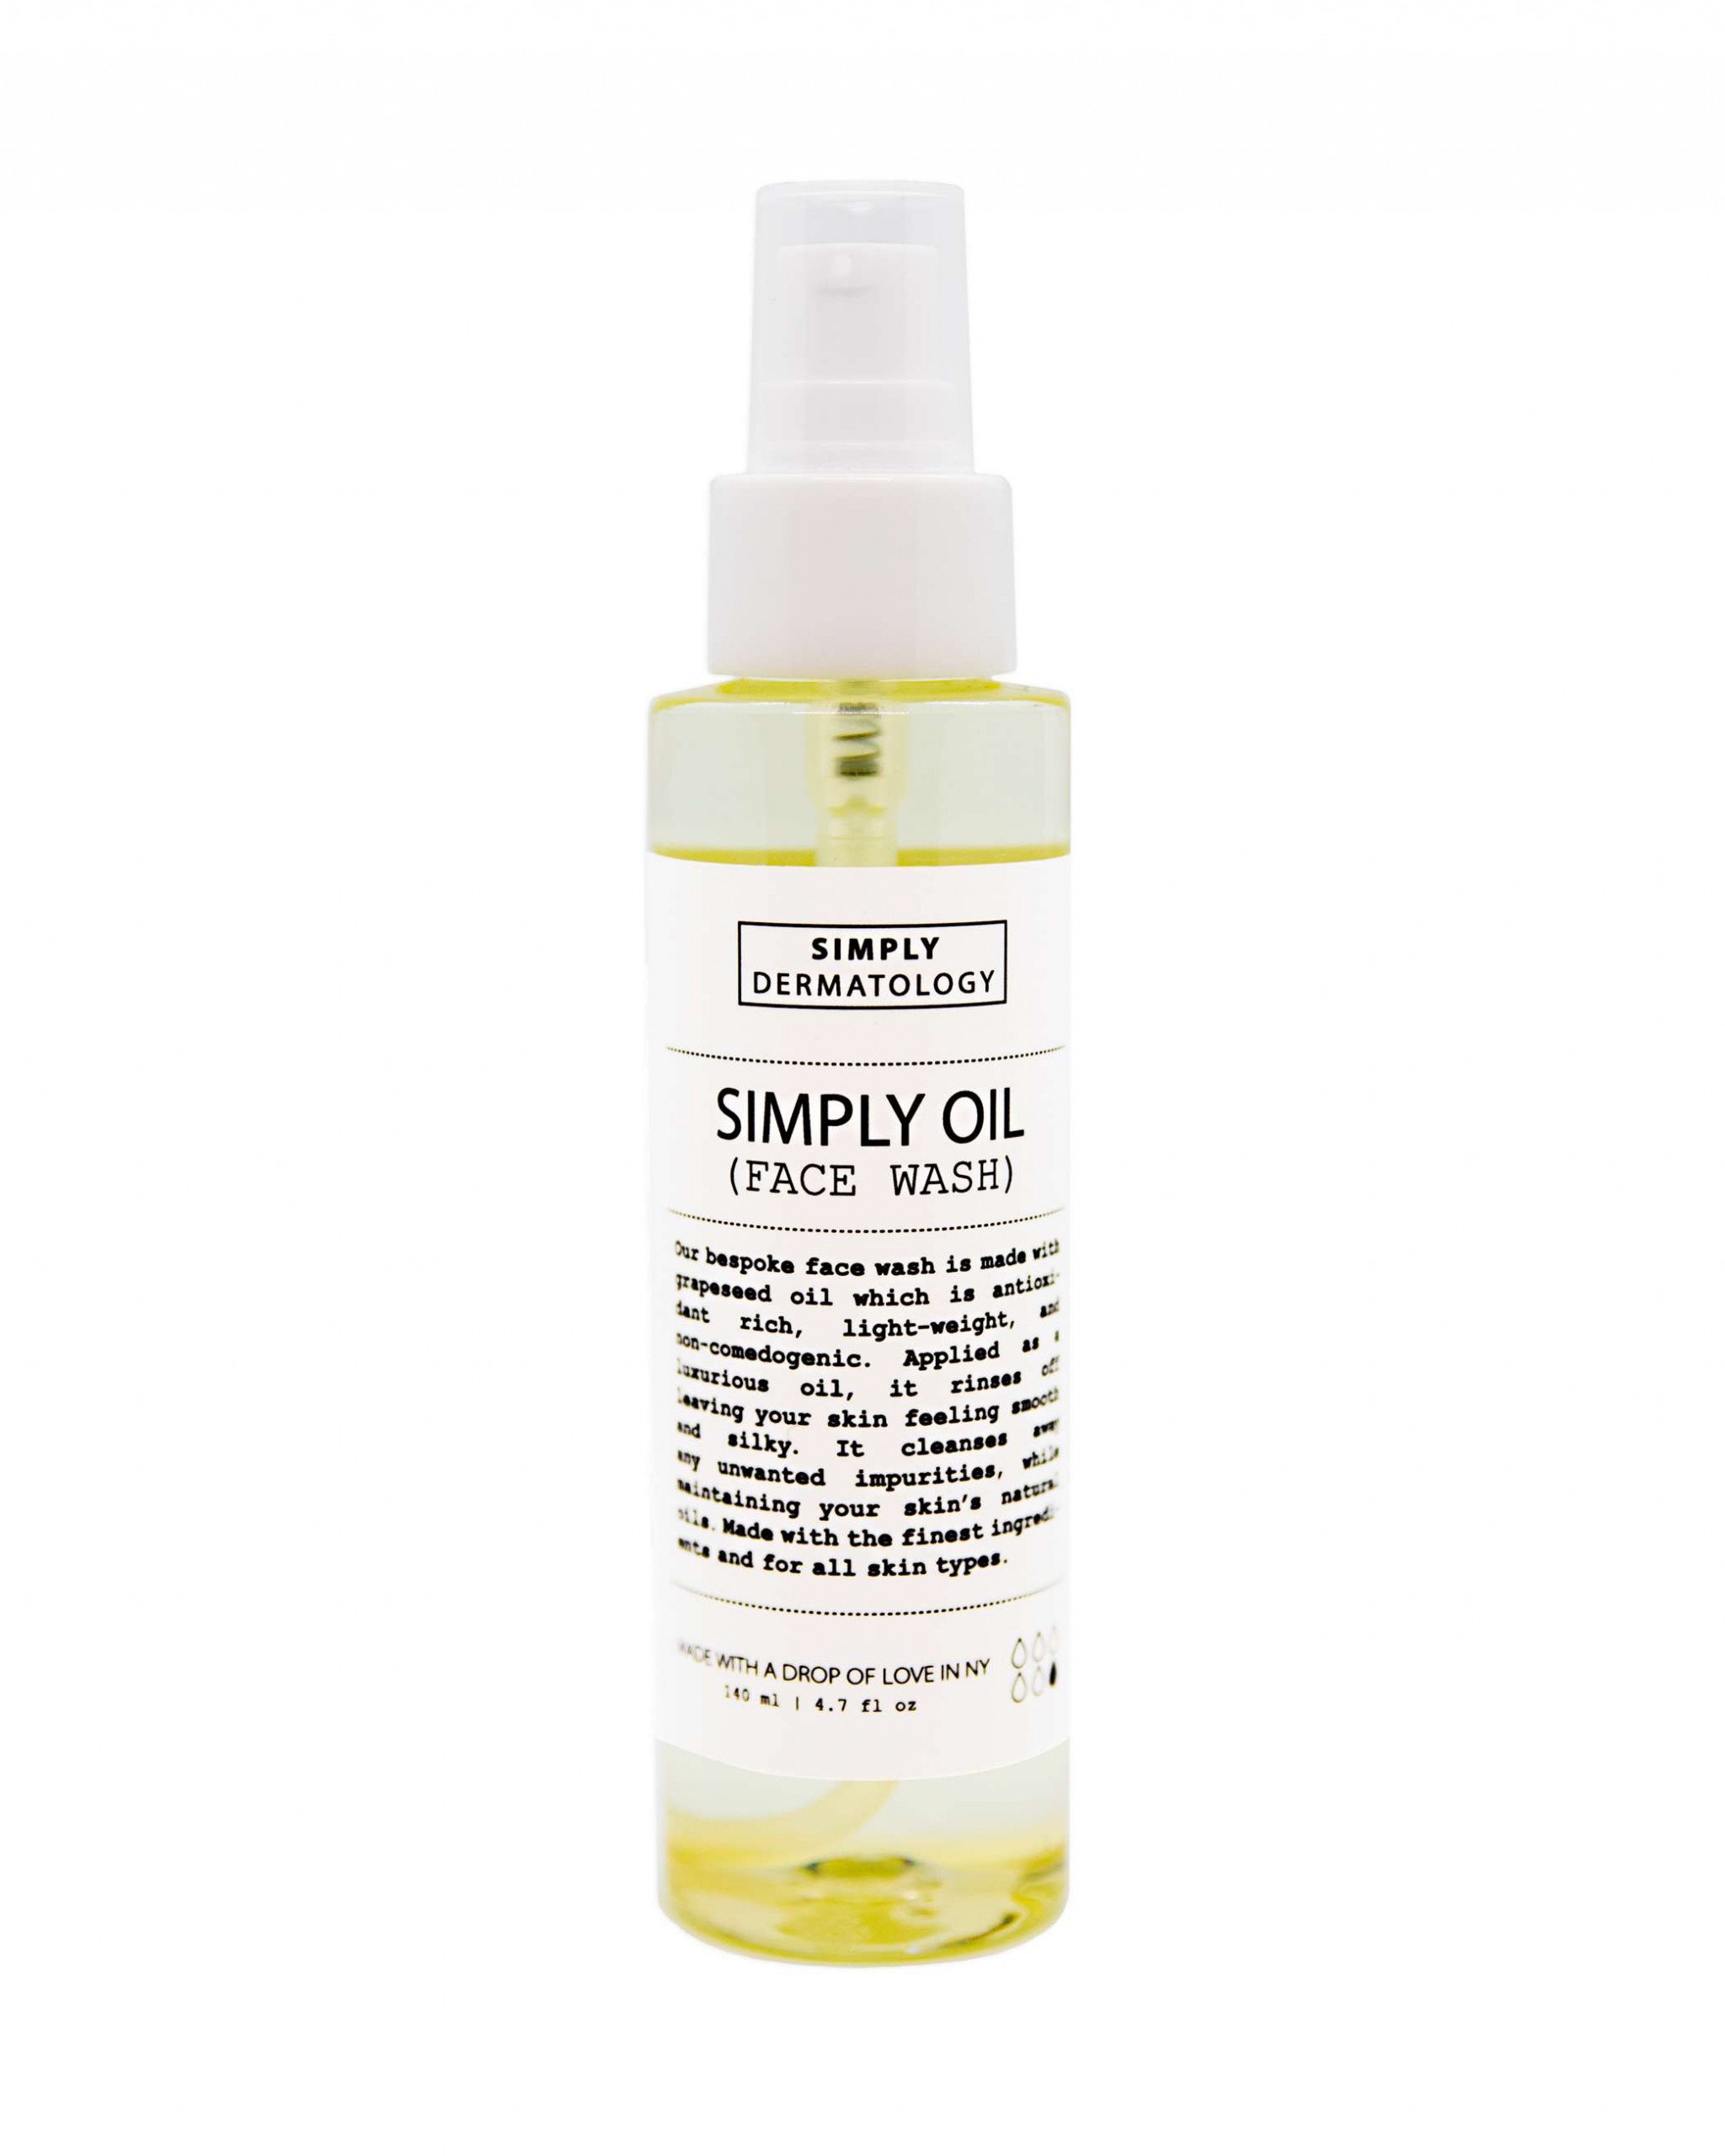 Simply Oil Face Wash bottle